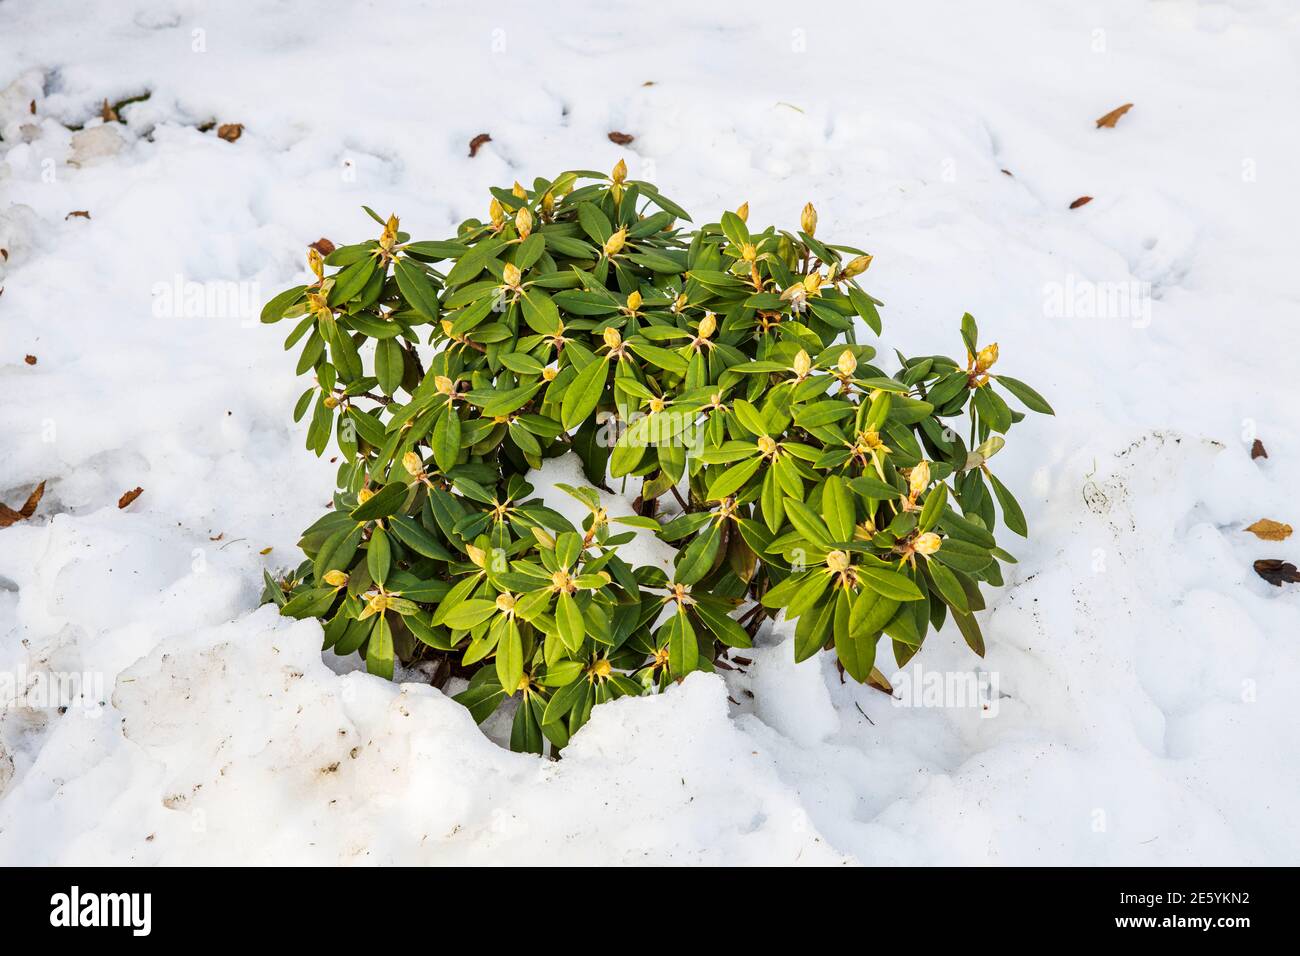 View of rhododendron plant under snow. Beautiful nature backgrounds. Stock Photo